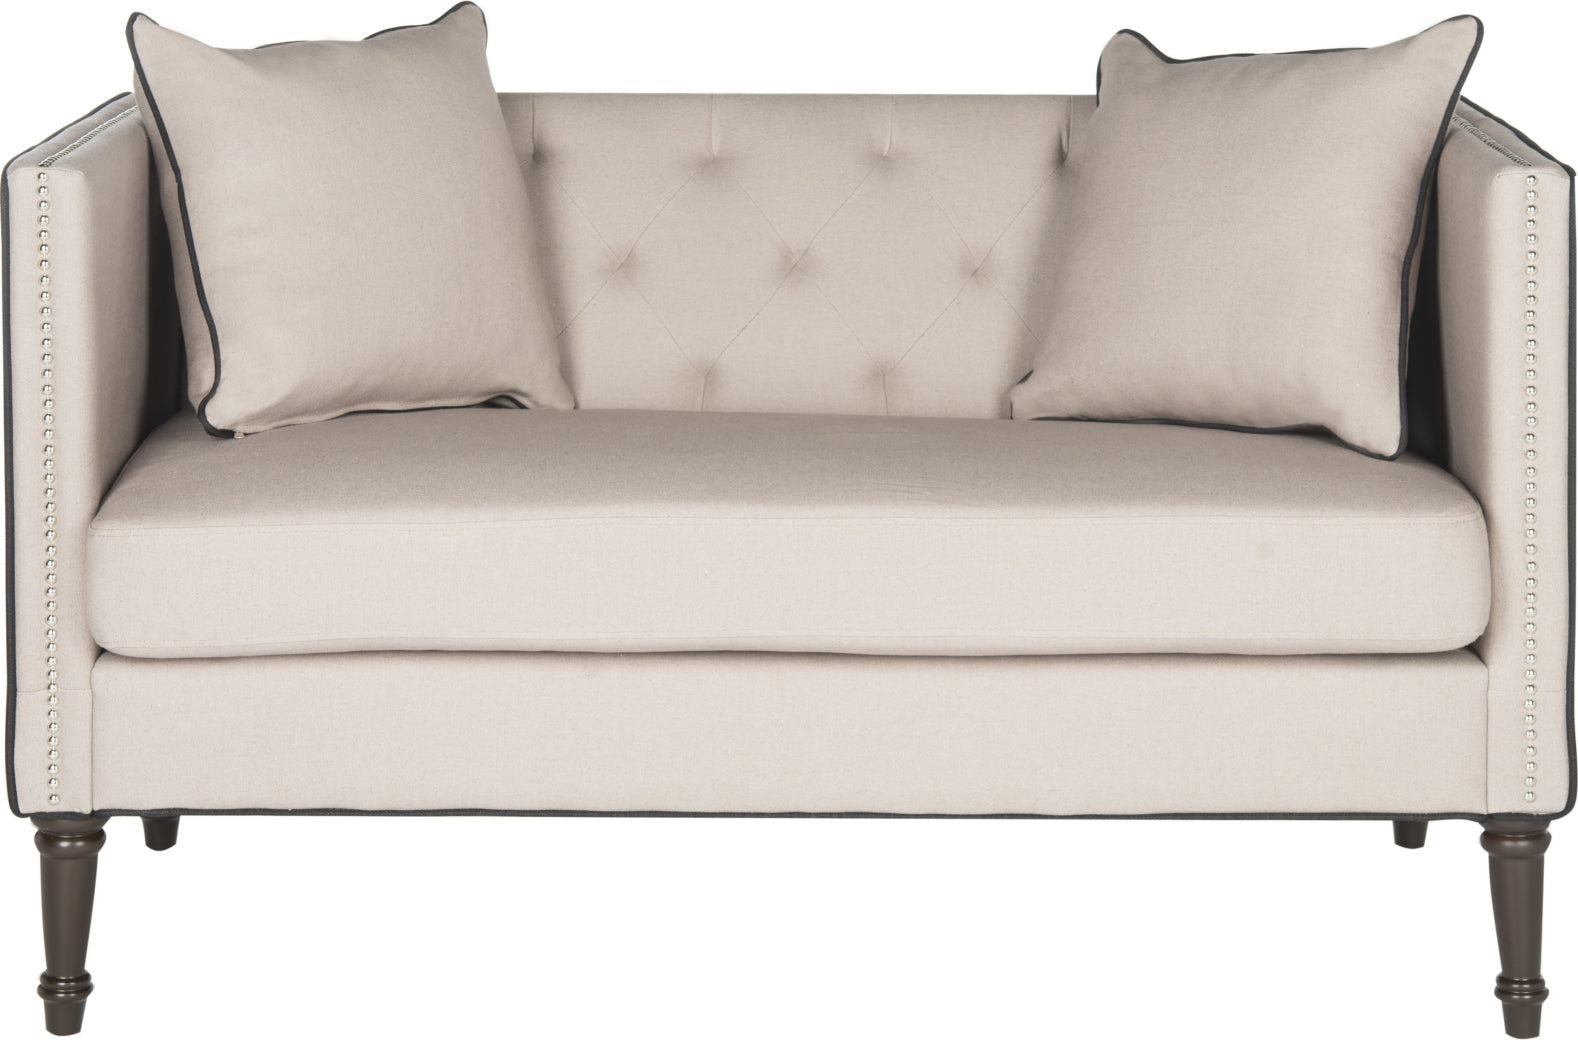 Safavieh Sarah Tufted Settee With Pillows Taupe and Black Espresso Furniture main image